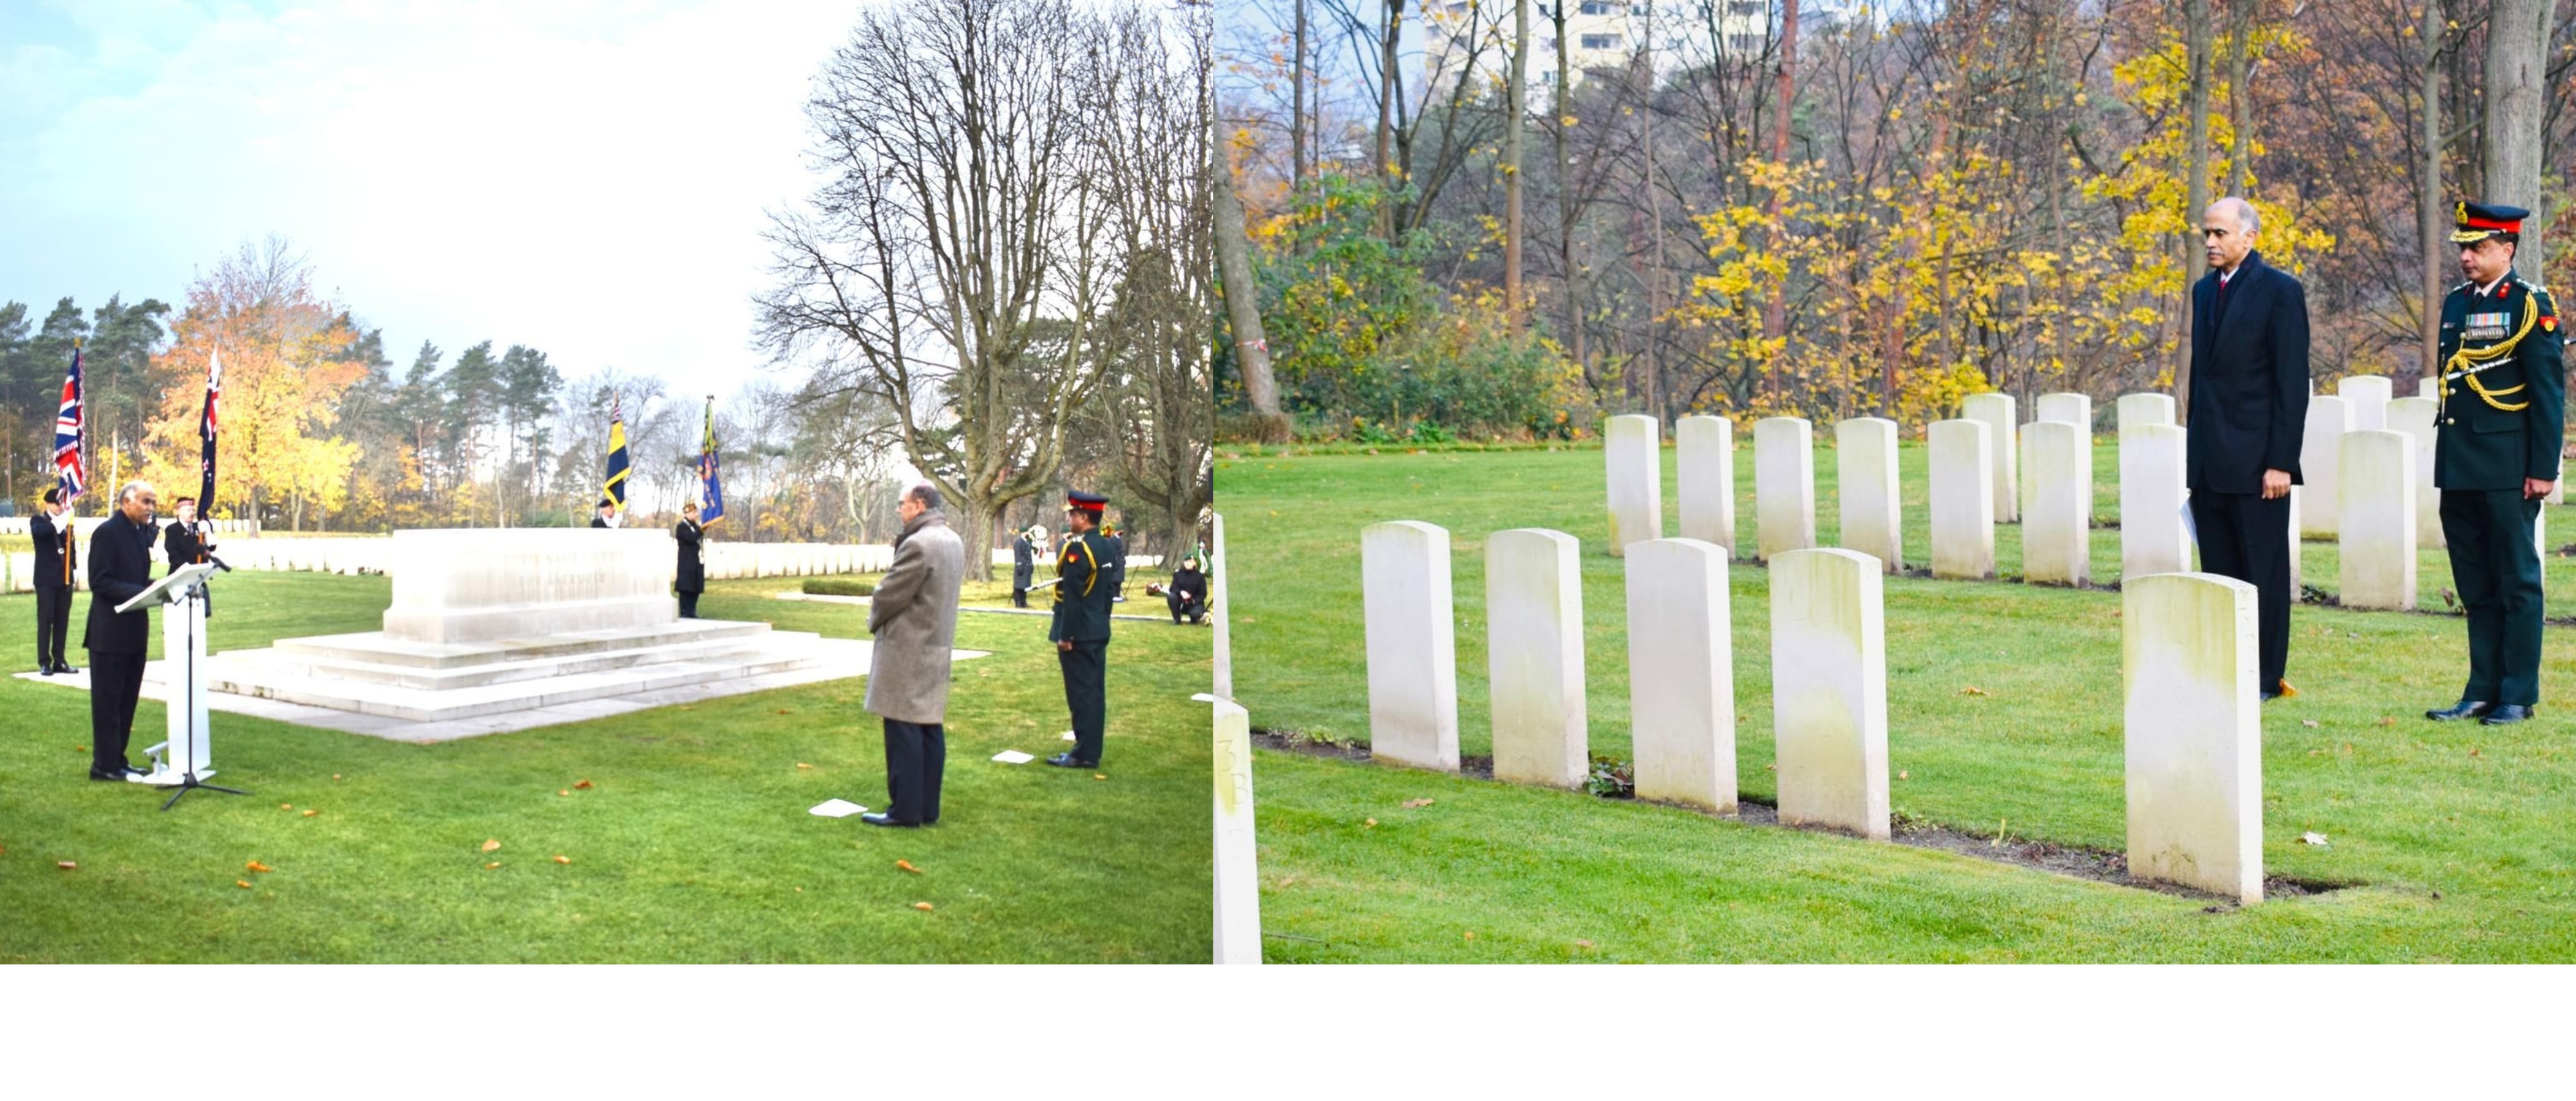  Ambassador-designate Mr. P. Harish read the exhortation at the Commonwealth Remembrance Ceremony and paid his respects at the graves of 51 Indian soldiers at the Commonwealth War Graves Commission Cemetery in Berlin on November 14, 2021